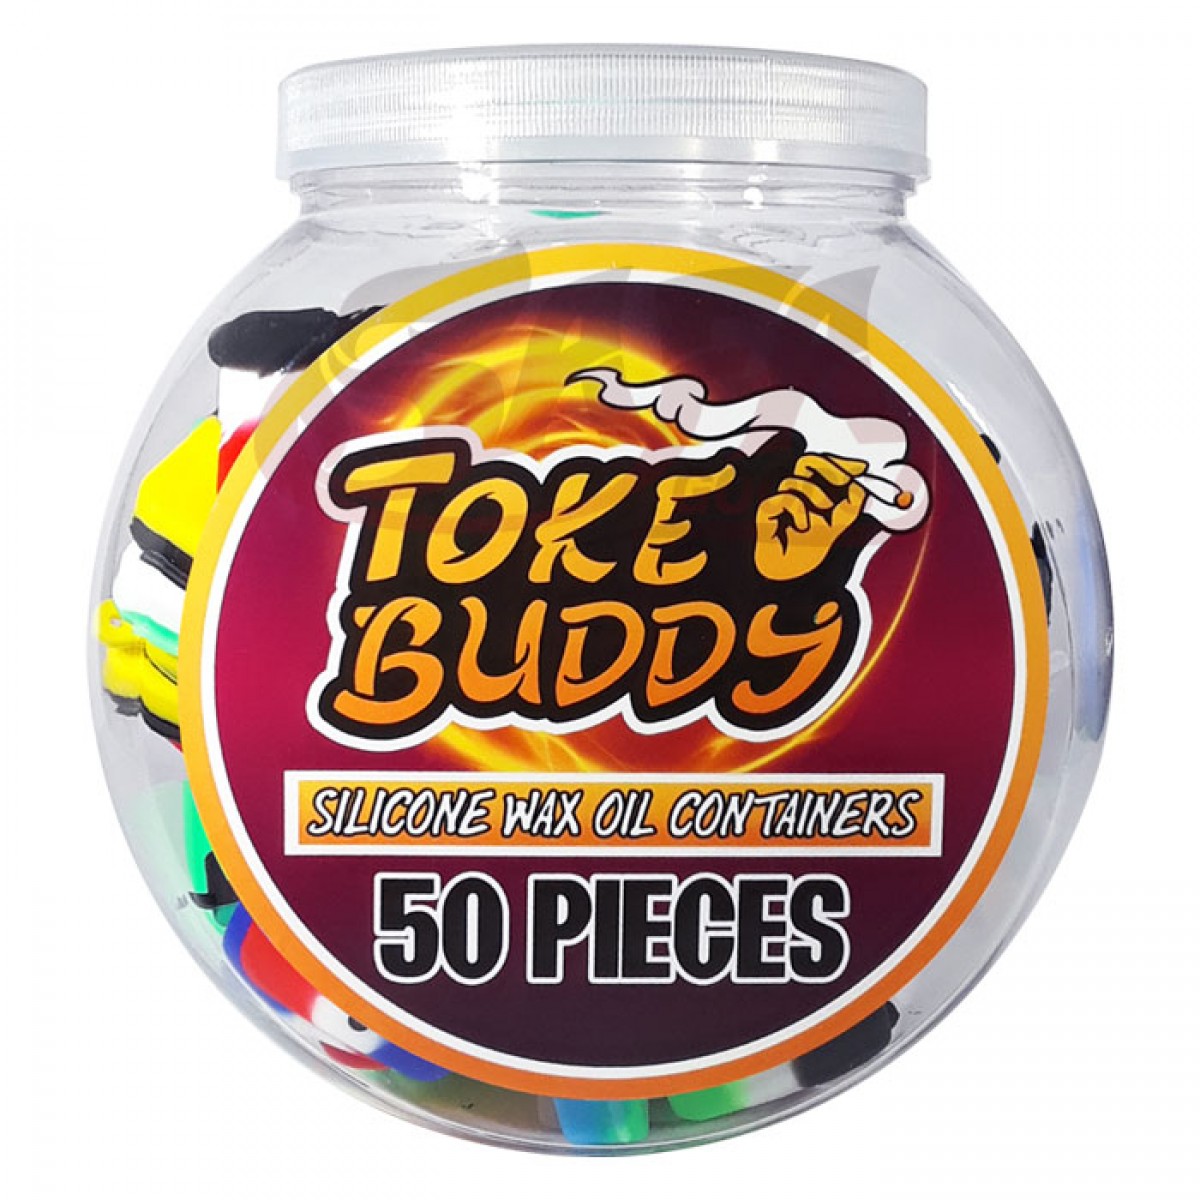 Toke Buddy Silicone Jar Containers 